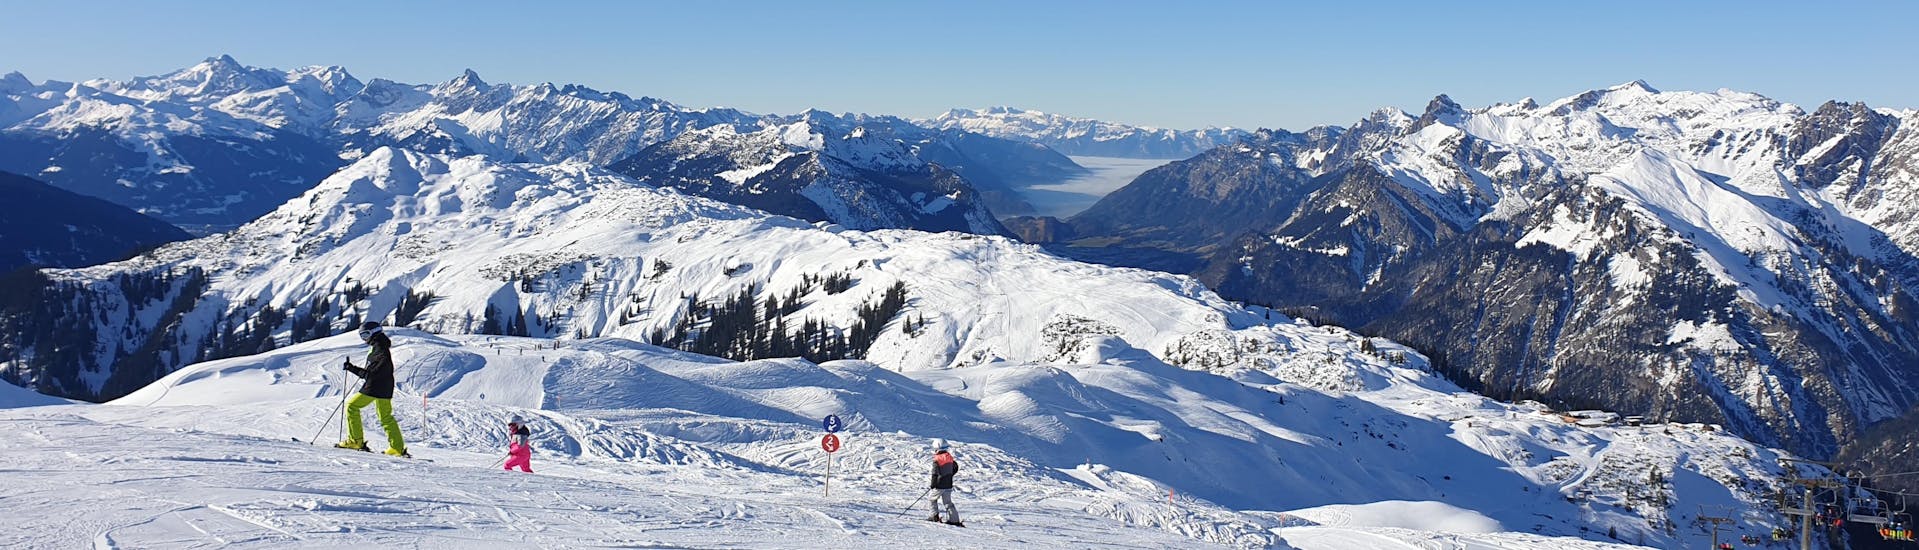 View over the sunny mountain landscape while learning to ski with the ski schools in Sonnenkopf-Klostertal.